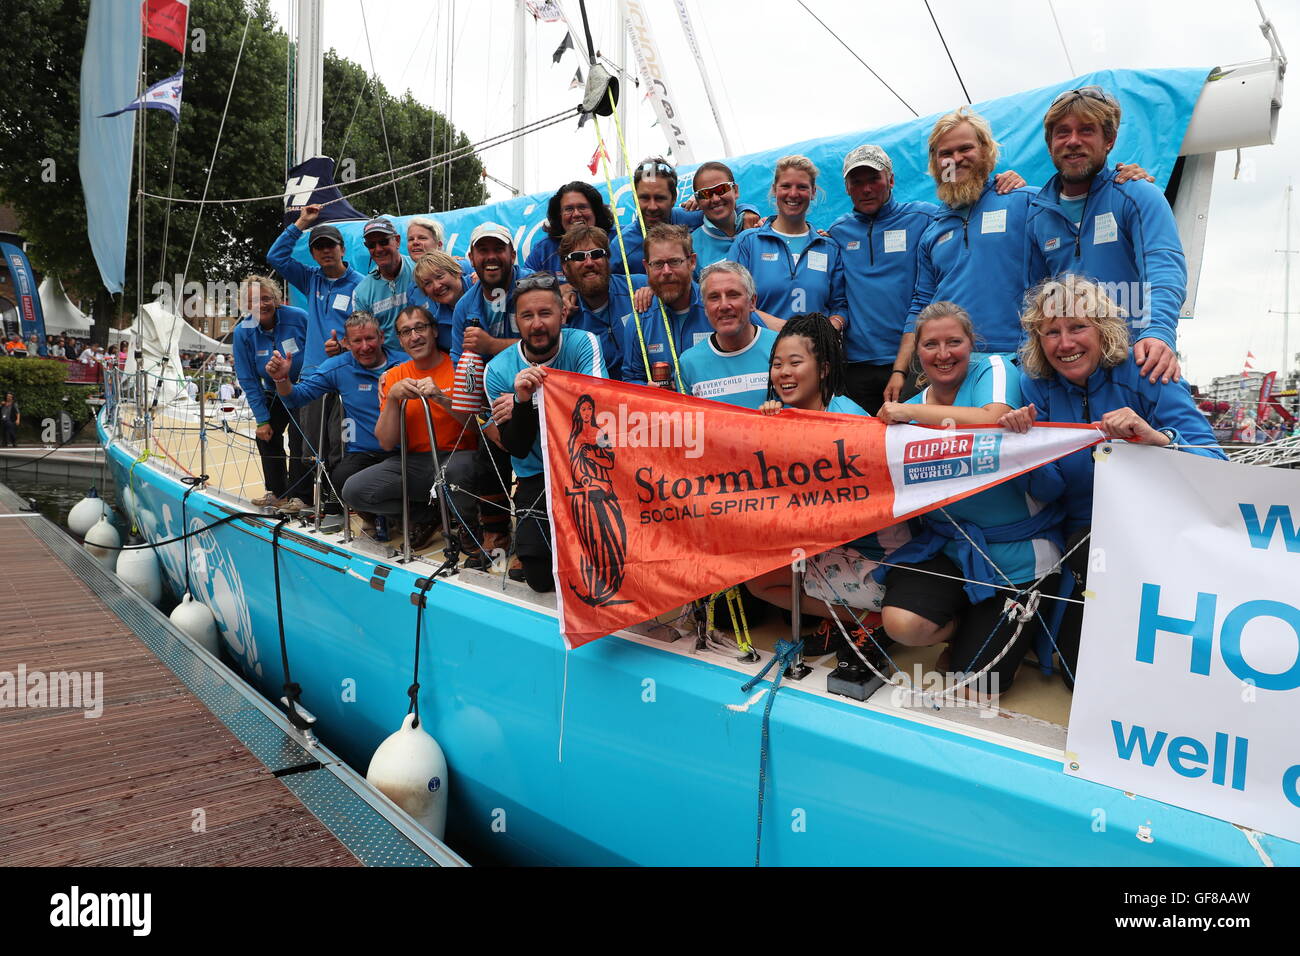 Team Unicef receive the Social Spirit Award during the final stage of the Clipper Round the World Yacht Race at St Katharine Docks, London. Stock Photo